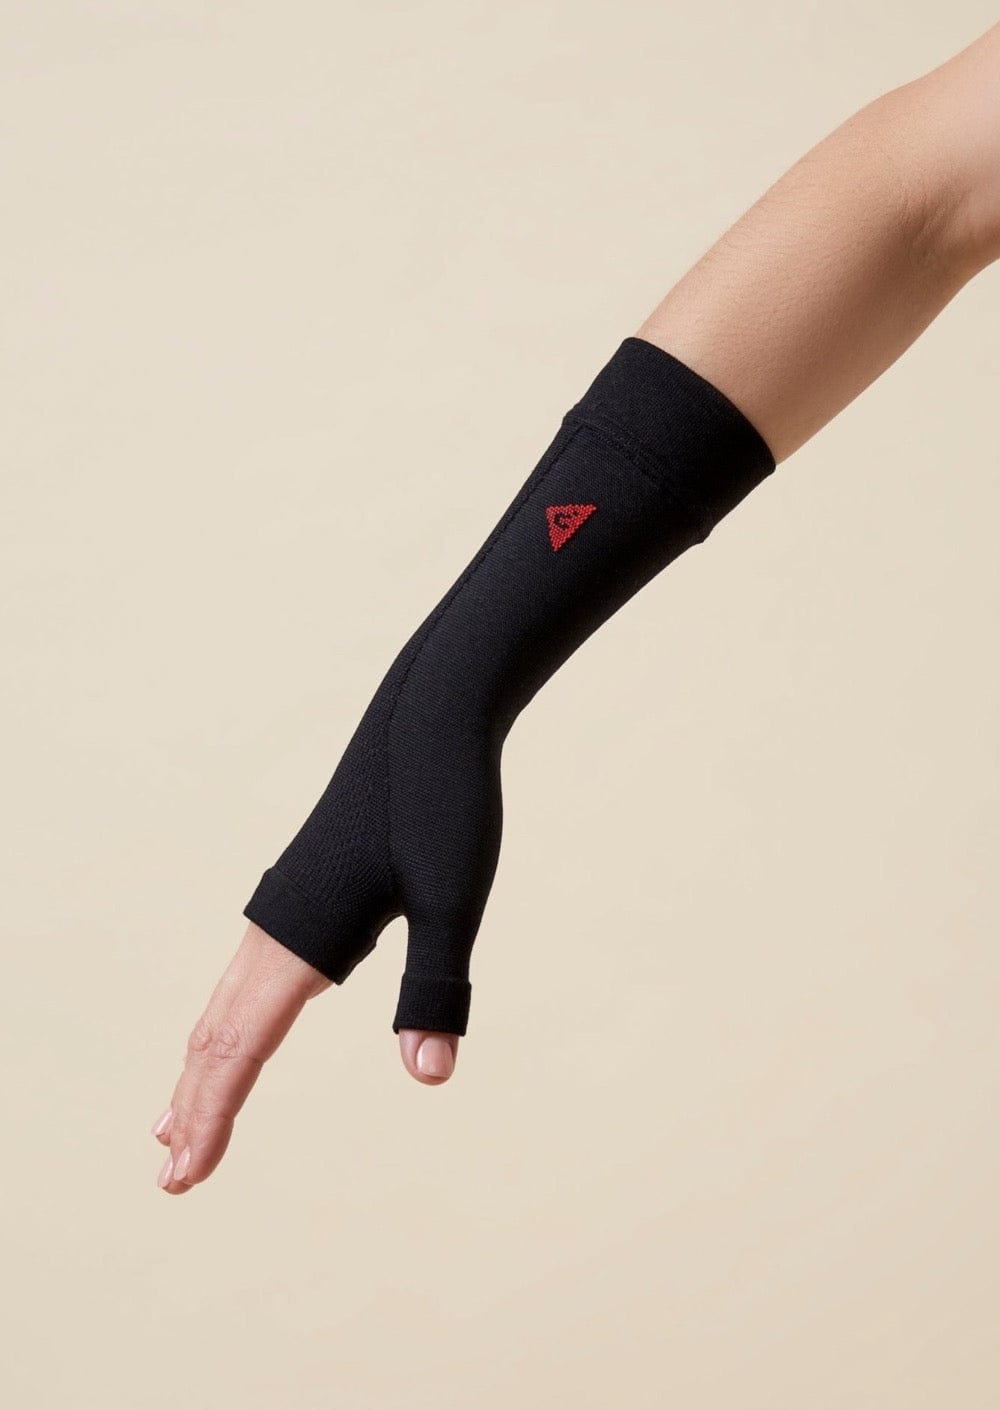 Thery Group Helping Hand Wrist Compression Sleeves in black side view